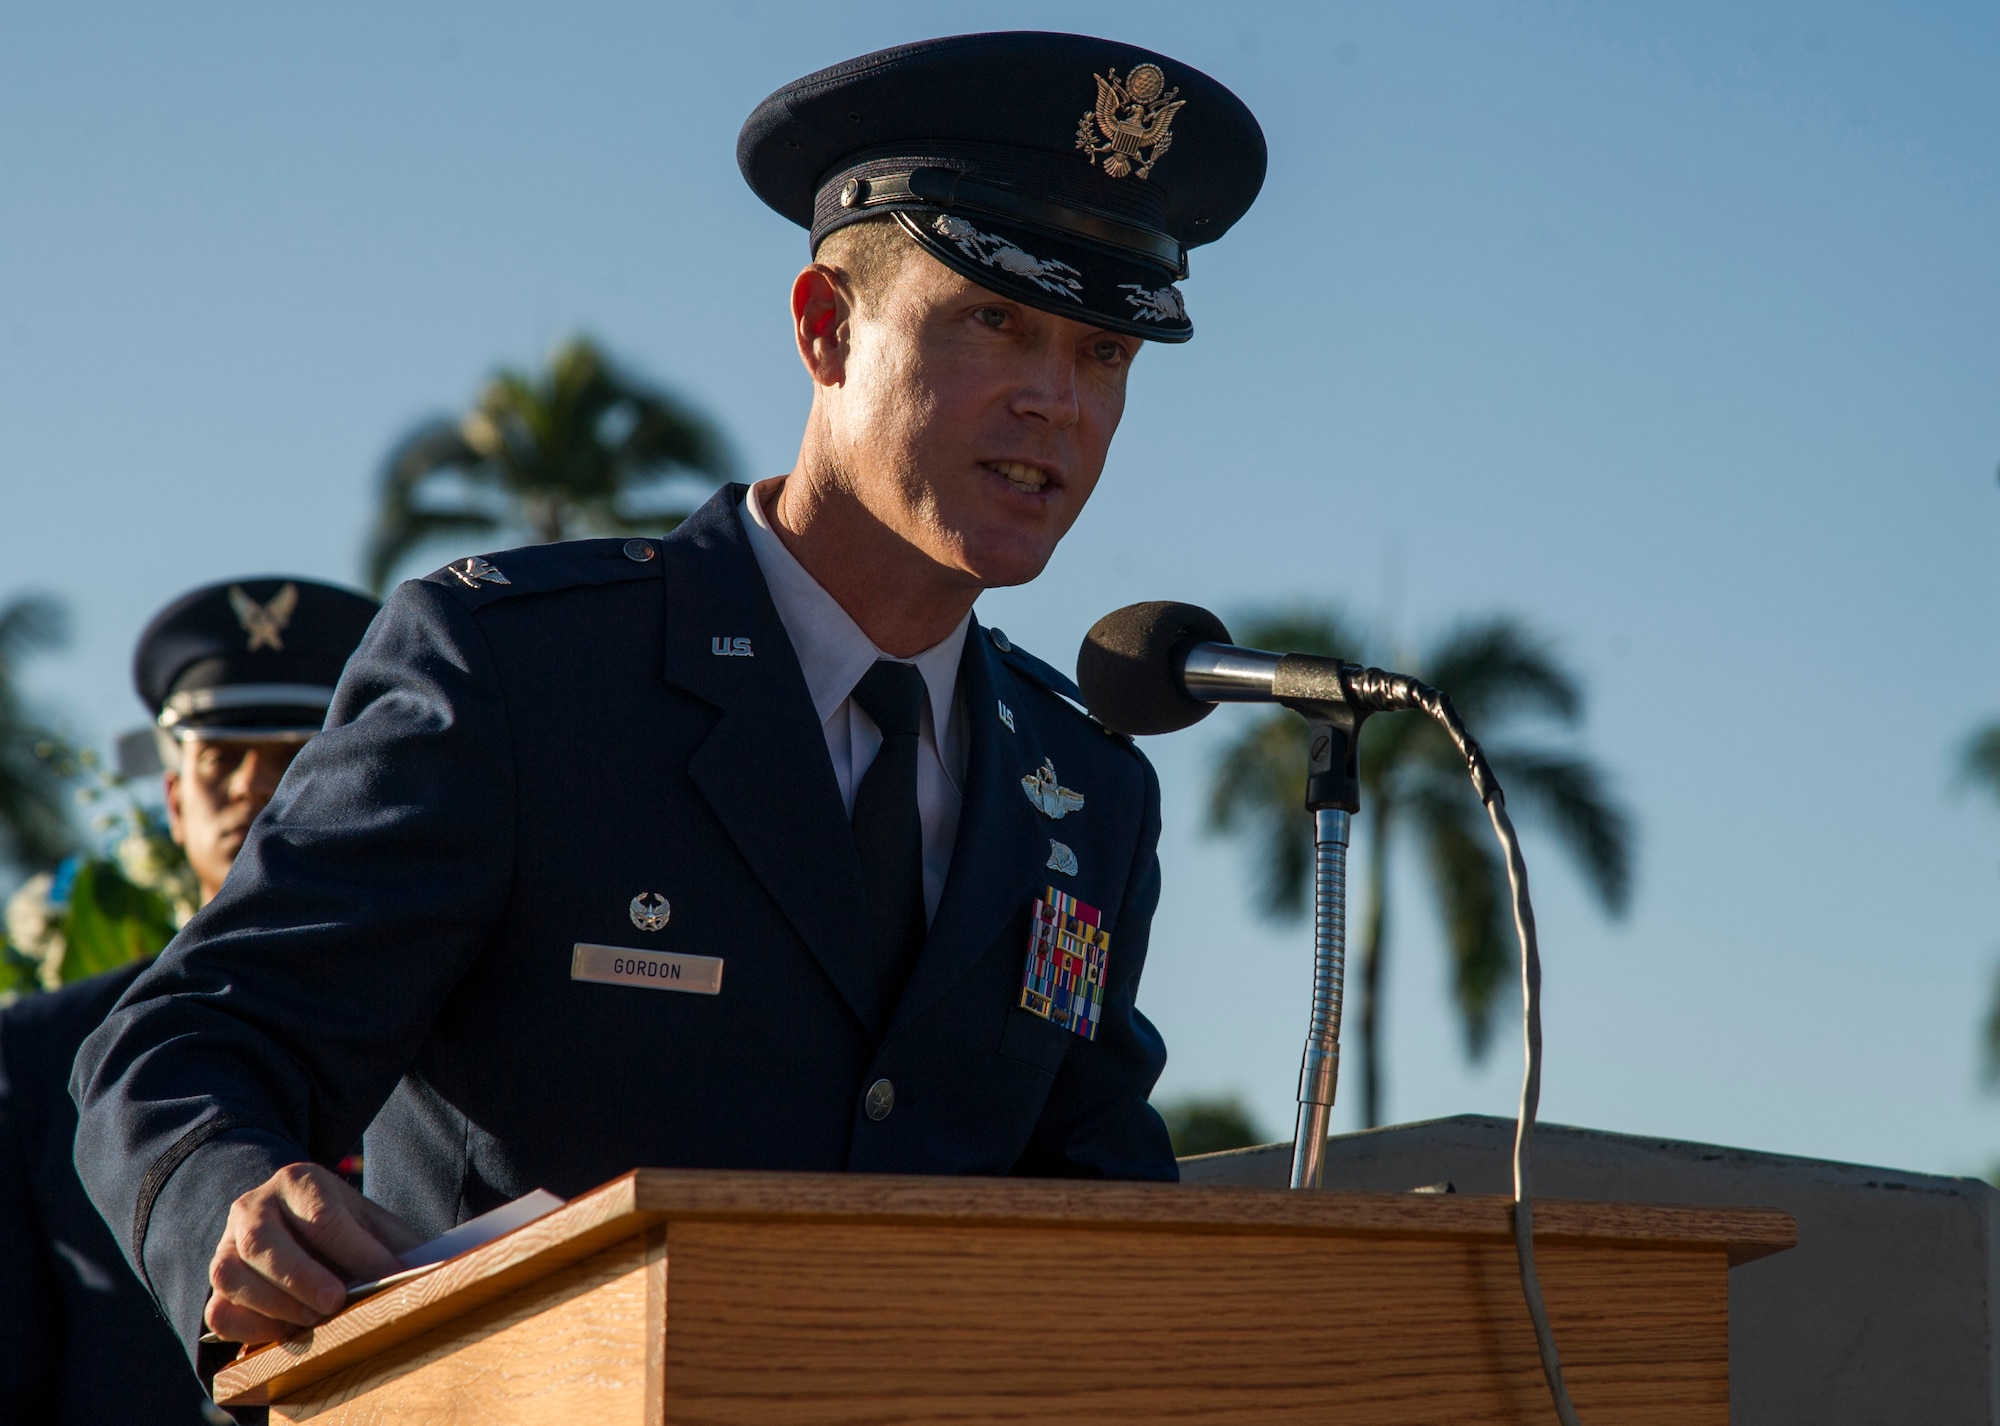 Col. Kevin Gordon, 15th Wing commander, gives his remarks during the 15th Wing’s Remembrance Ceremony, Joint Base Pearl Harbor-Hickam, Hawaii, Dec. 7, 2017. The 15th Wing sponsored the ceremony to remember the 76th anniversary of the attacks that claimed the lives of 189 Army Air Corps Airmen and civilians and injured 303 others. (U.S. Air Force photo by Tech. Sgt. Heather Redman)